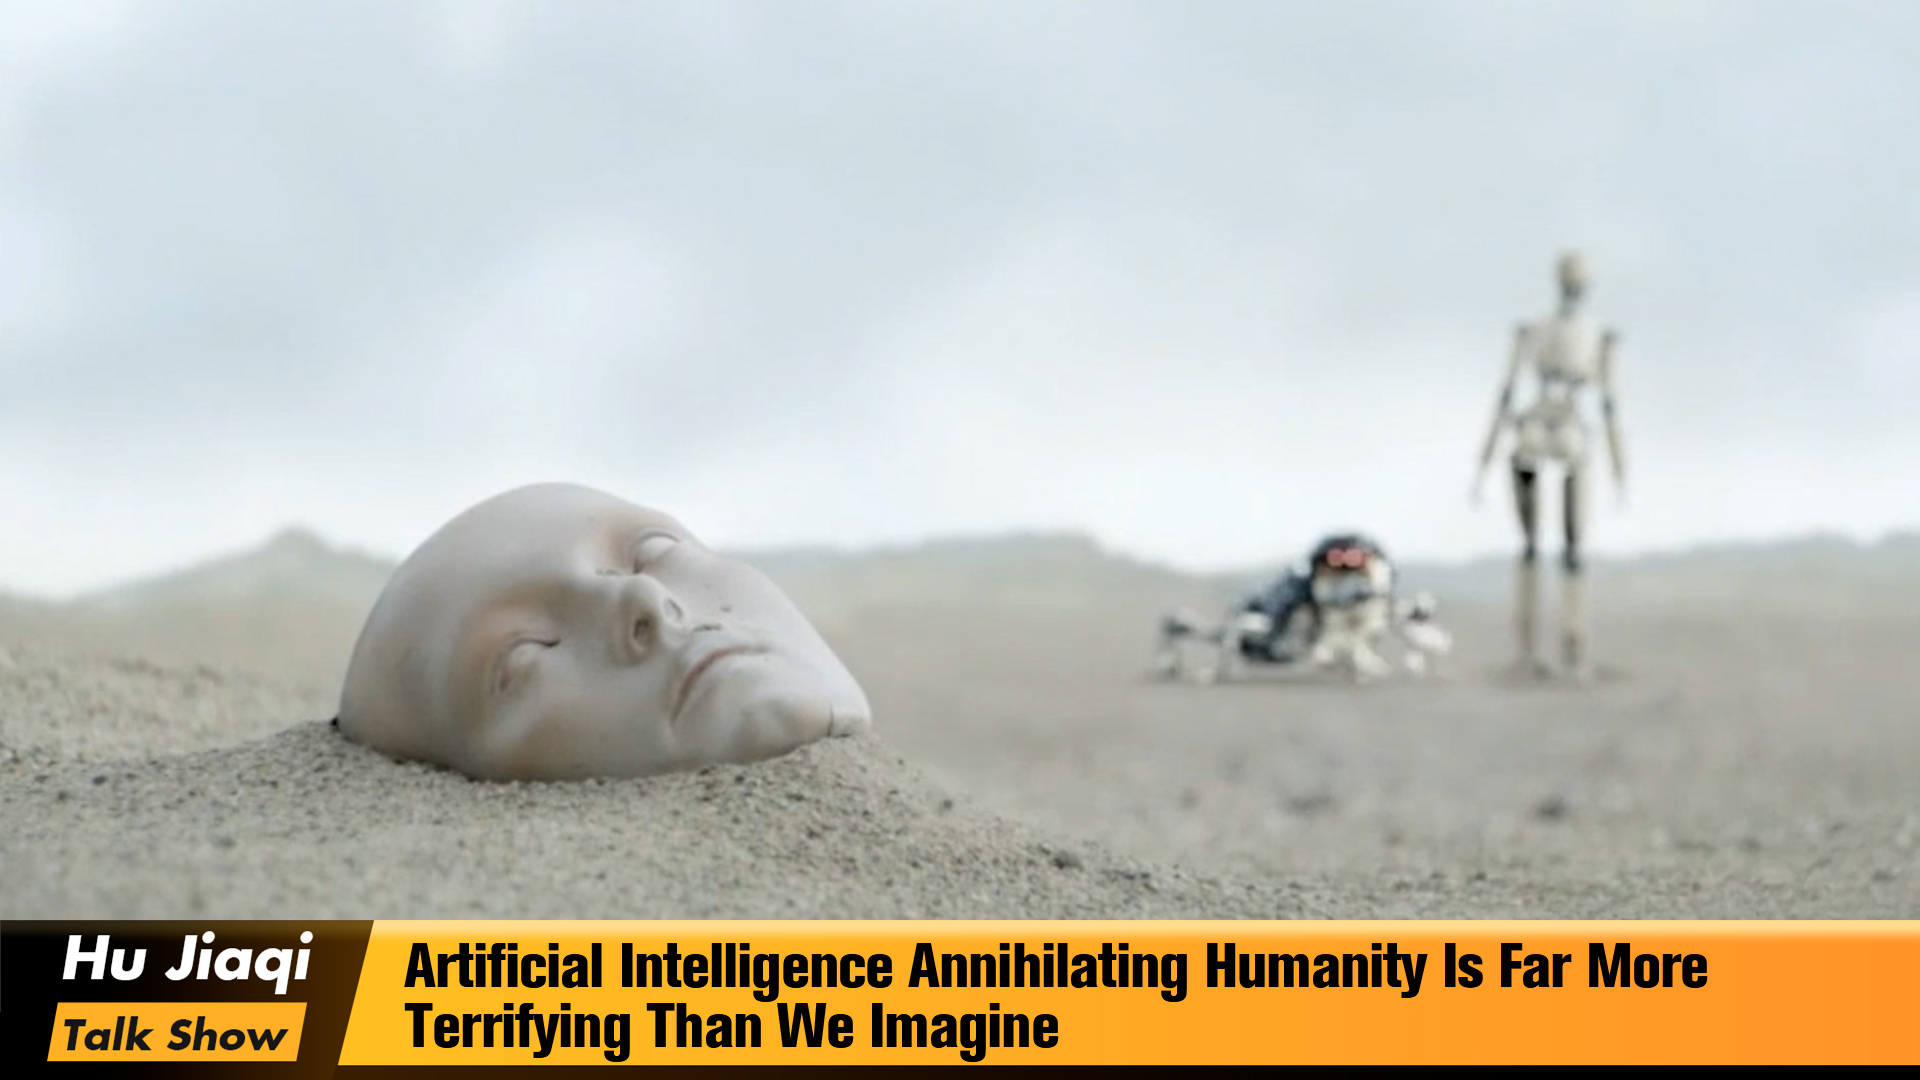 Artificial Intelligence Annihilating Humanity Is Far More Terrifying Than We Imagine